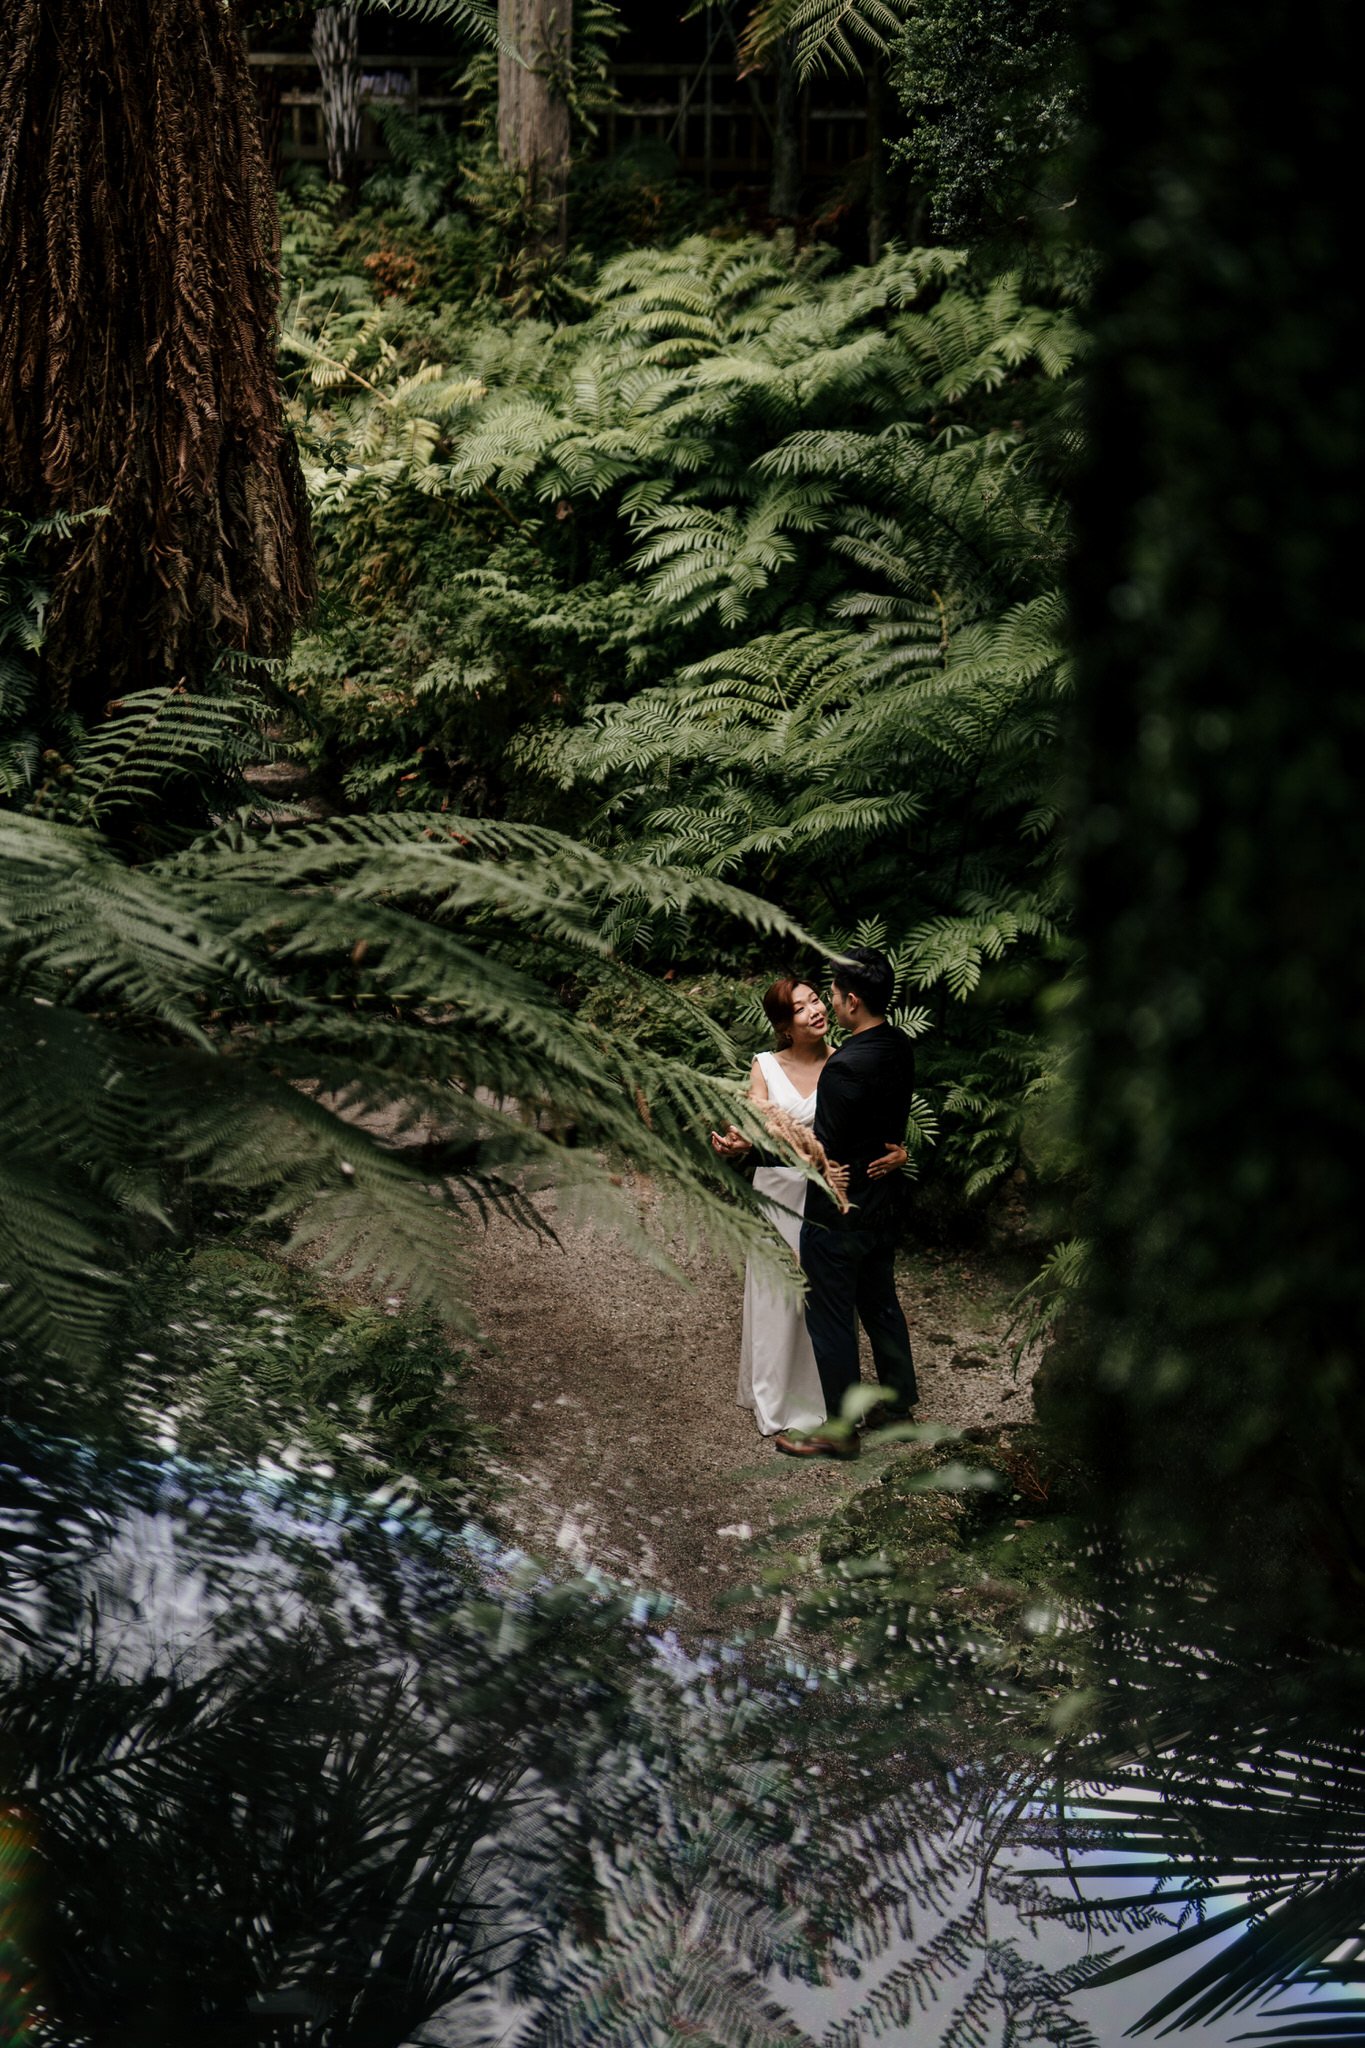 auckland-wedding-photographer-videographer-story-by-koo-koo's-jewelry-dear-white-productions-pre-wedding-engagement-photo-glass-house-botanic-fernery-garden (27).JPG